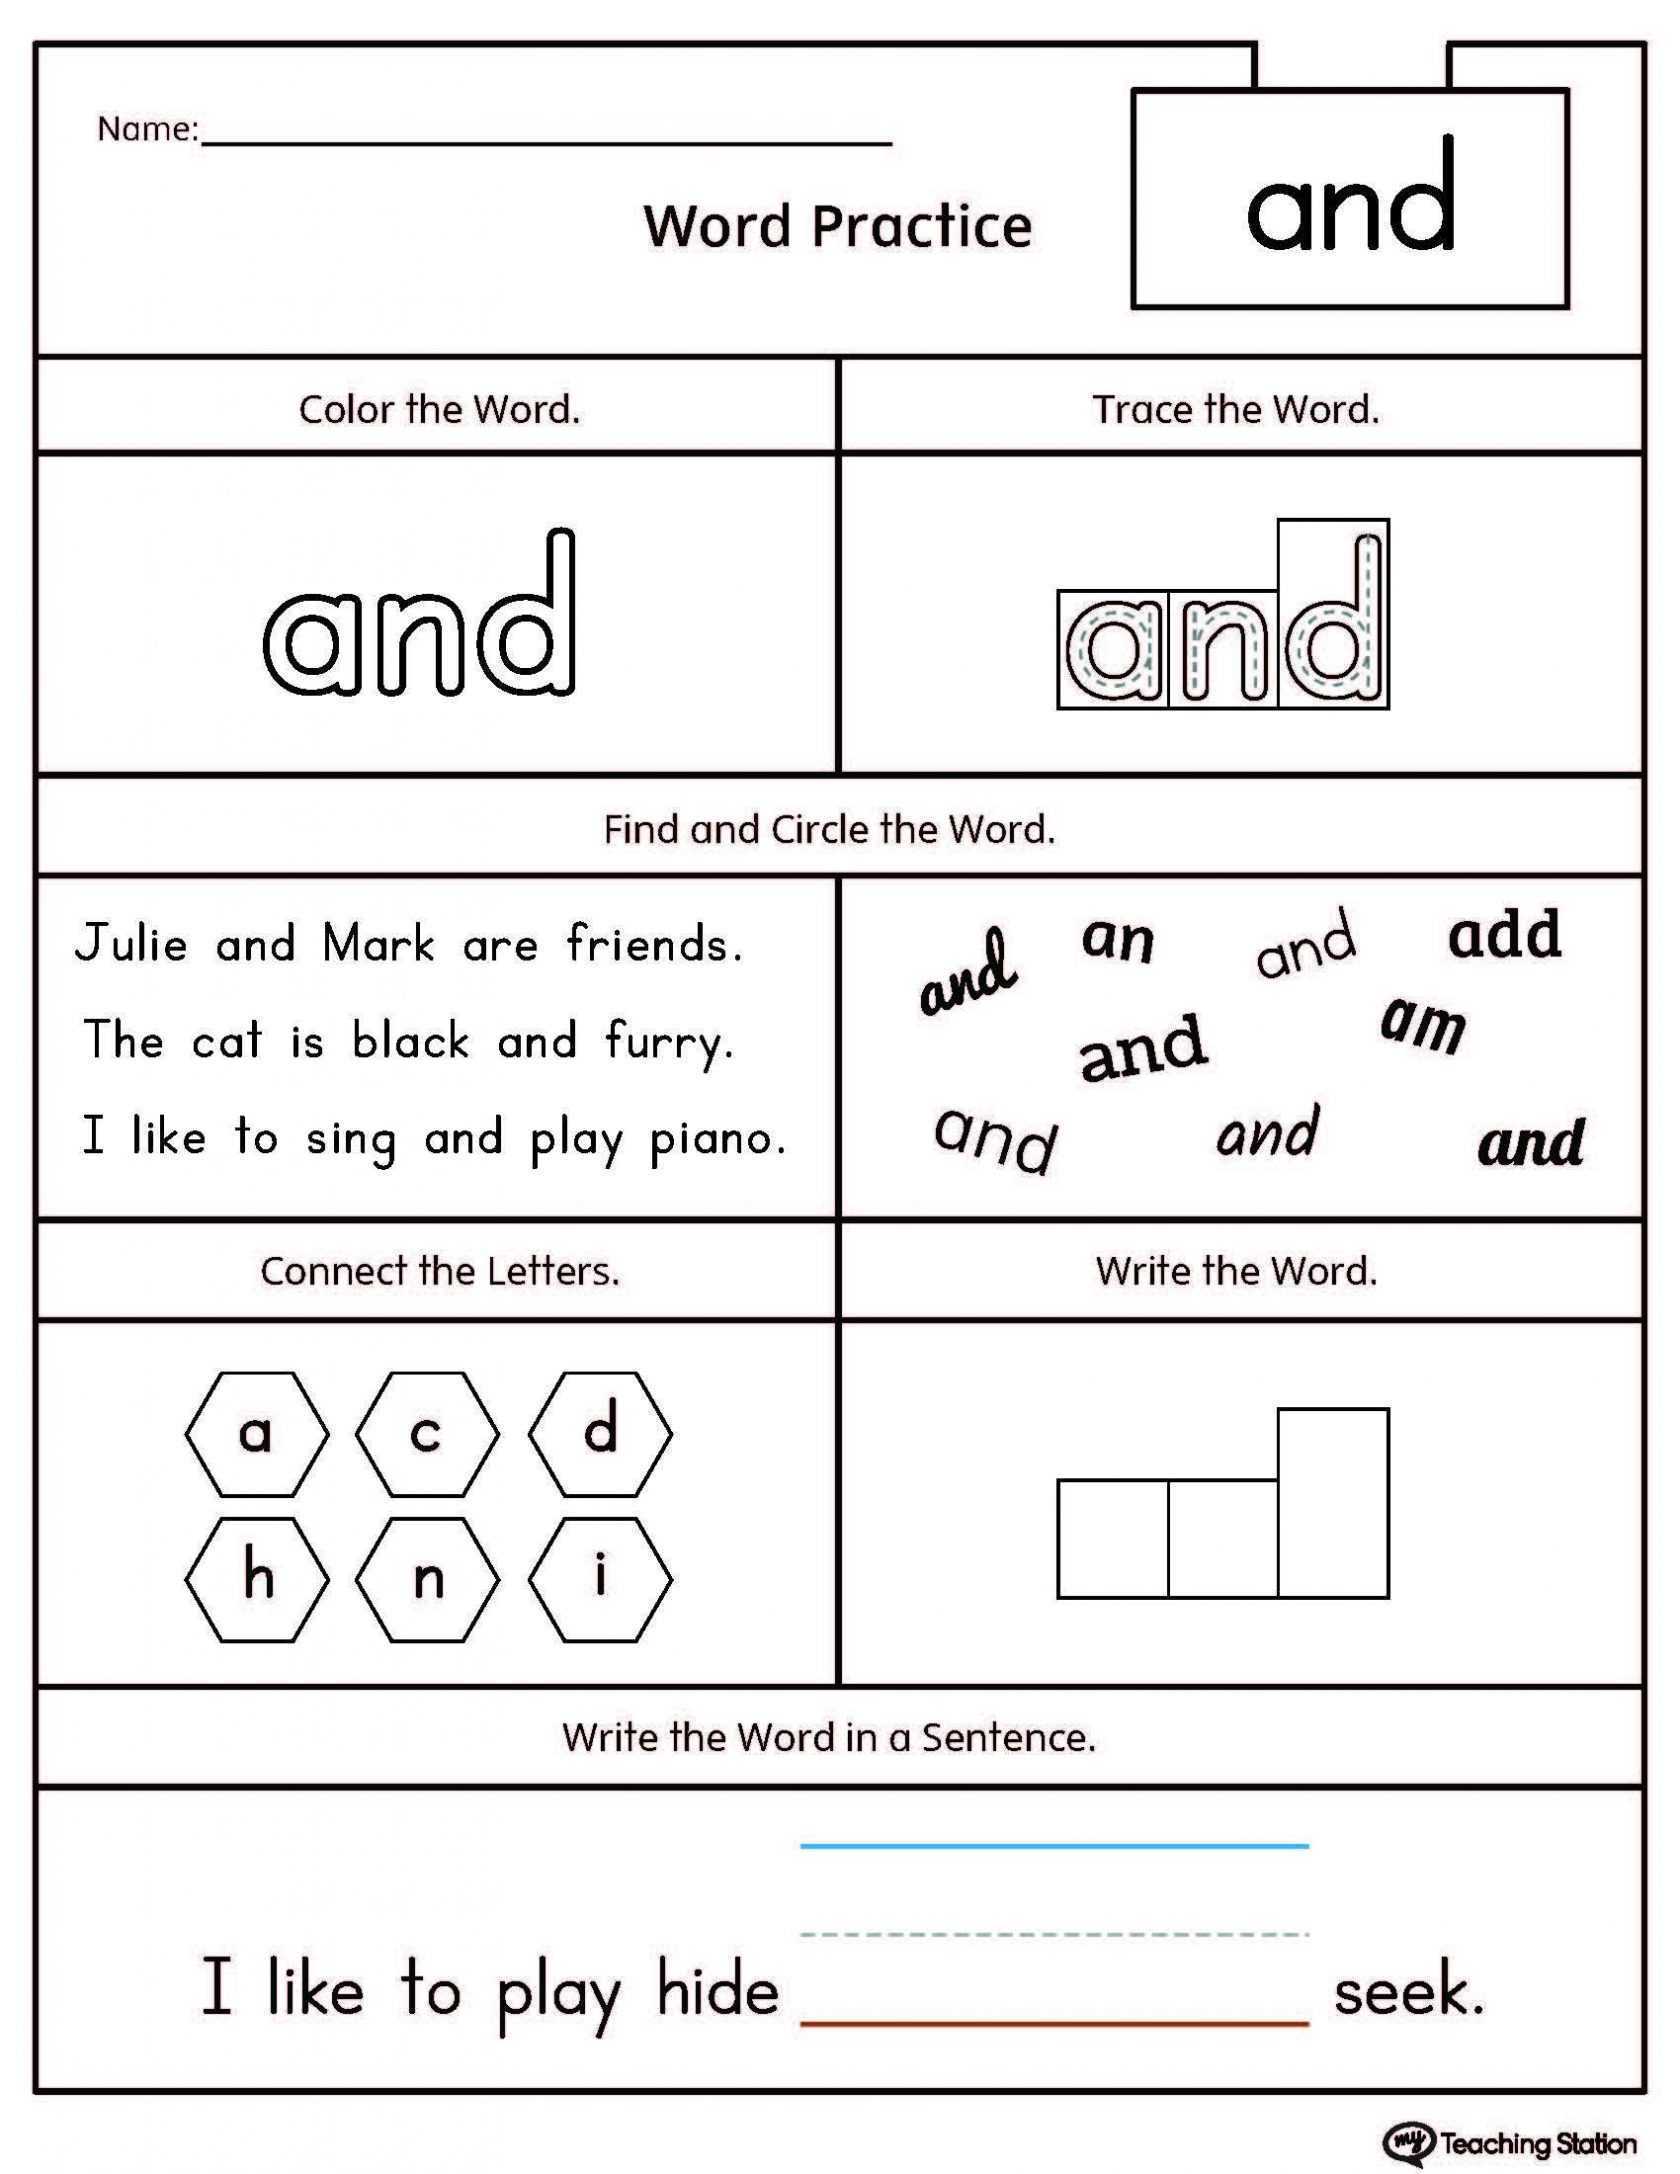 Box and Whisker Plot Worksheet 1 as Well as Spelling Numbers Worksheets 1 20 Gallery Worksheet Math for Kids